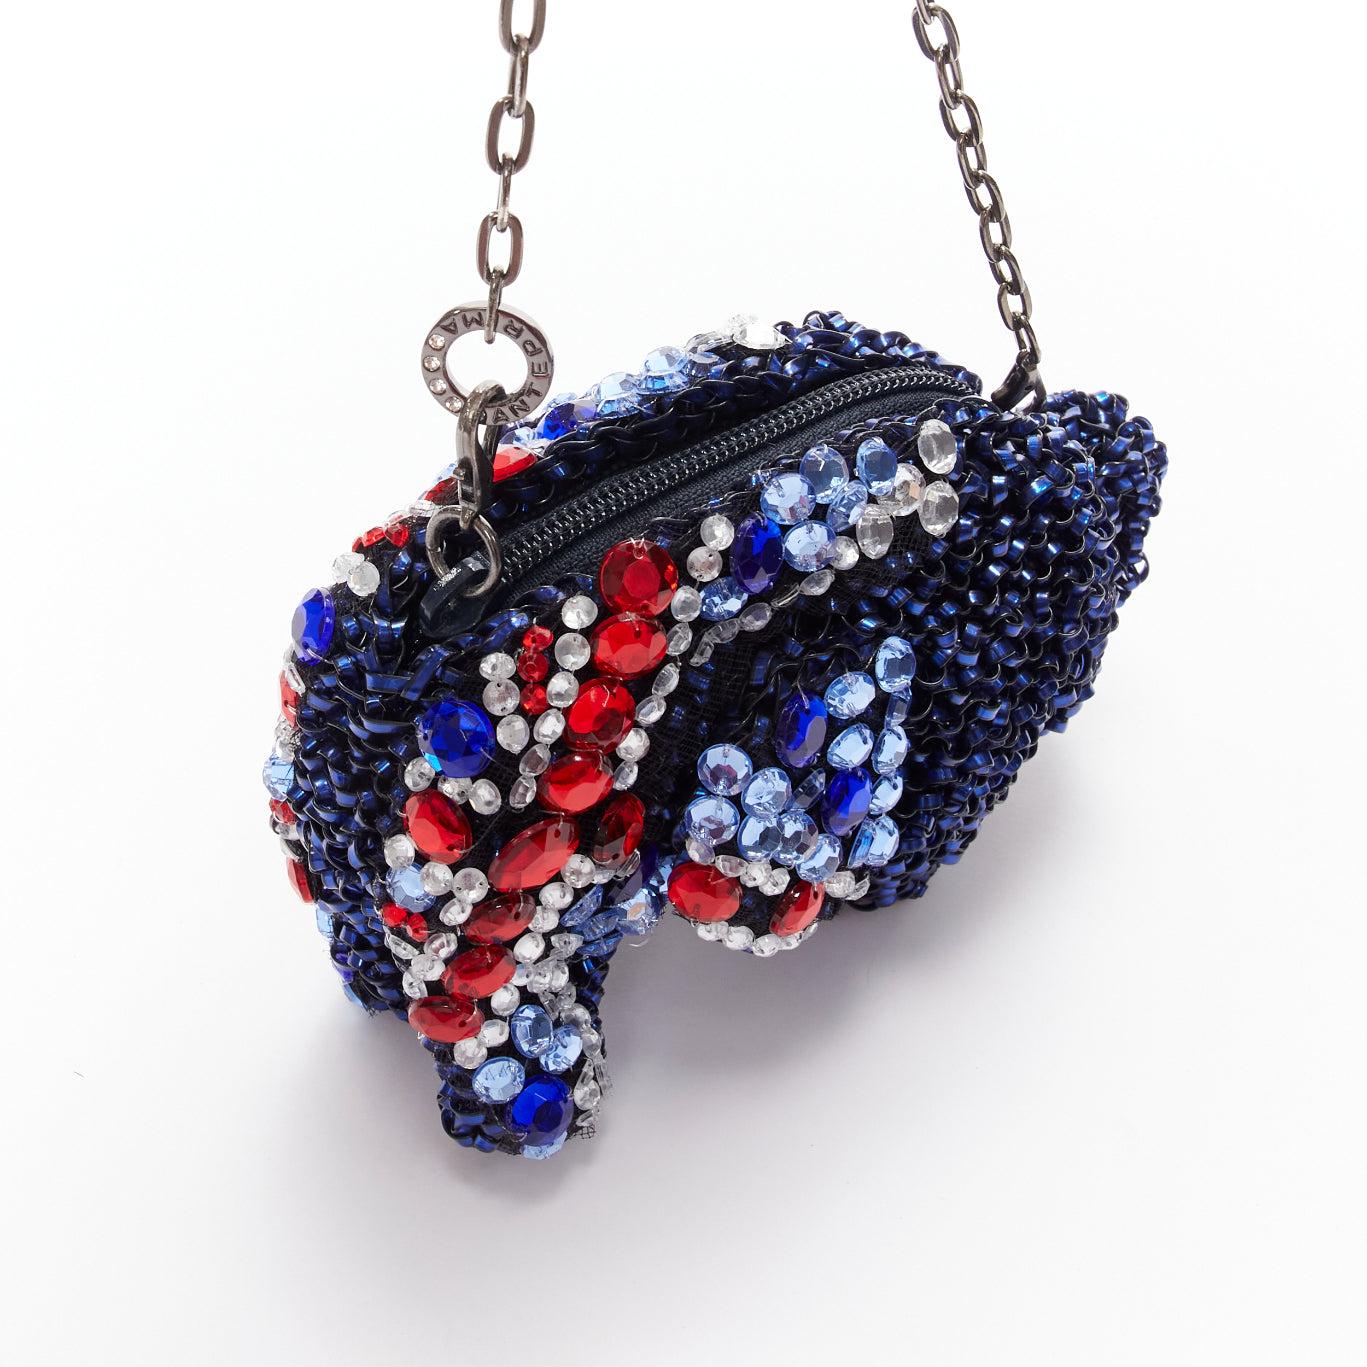 rare ANTEPRIMA Wire Bag blue red crystal Union Jack elephant clutch For Sale 3